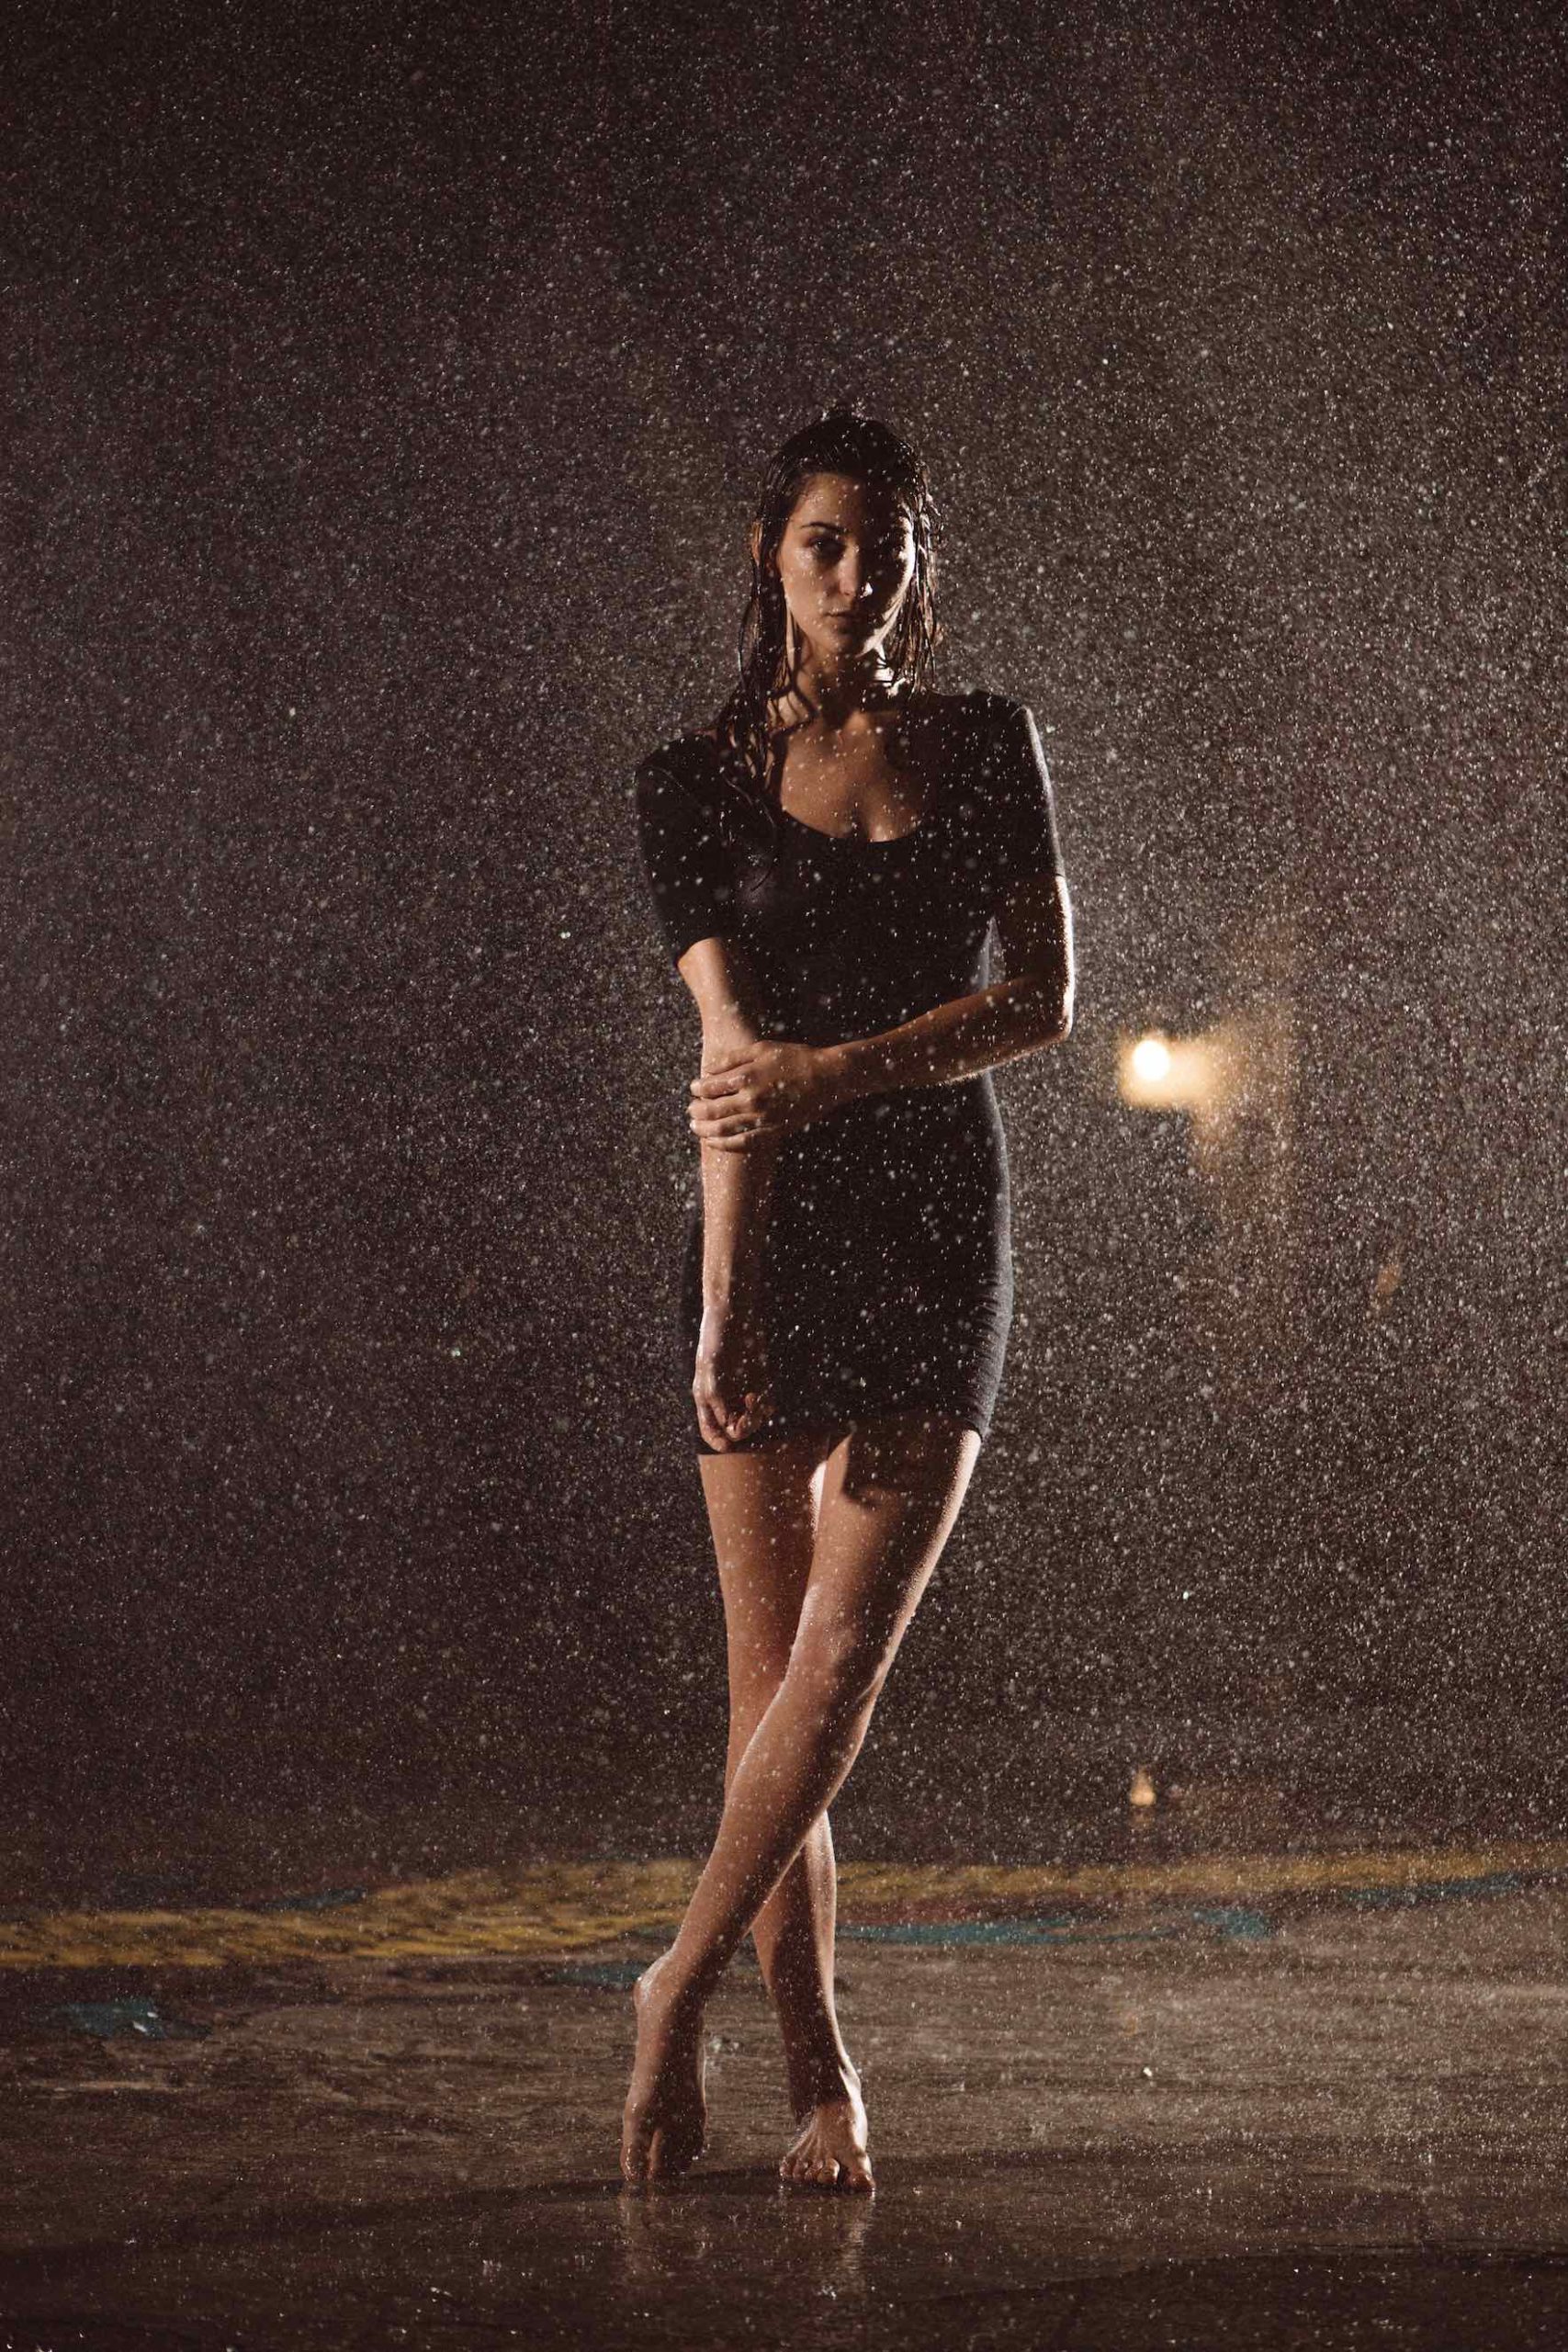 IU Woman with long hair posing for camera barefoot wearing a black dress under a shower of water